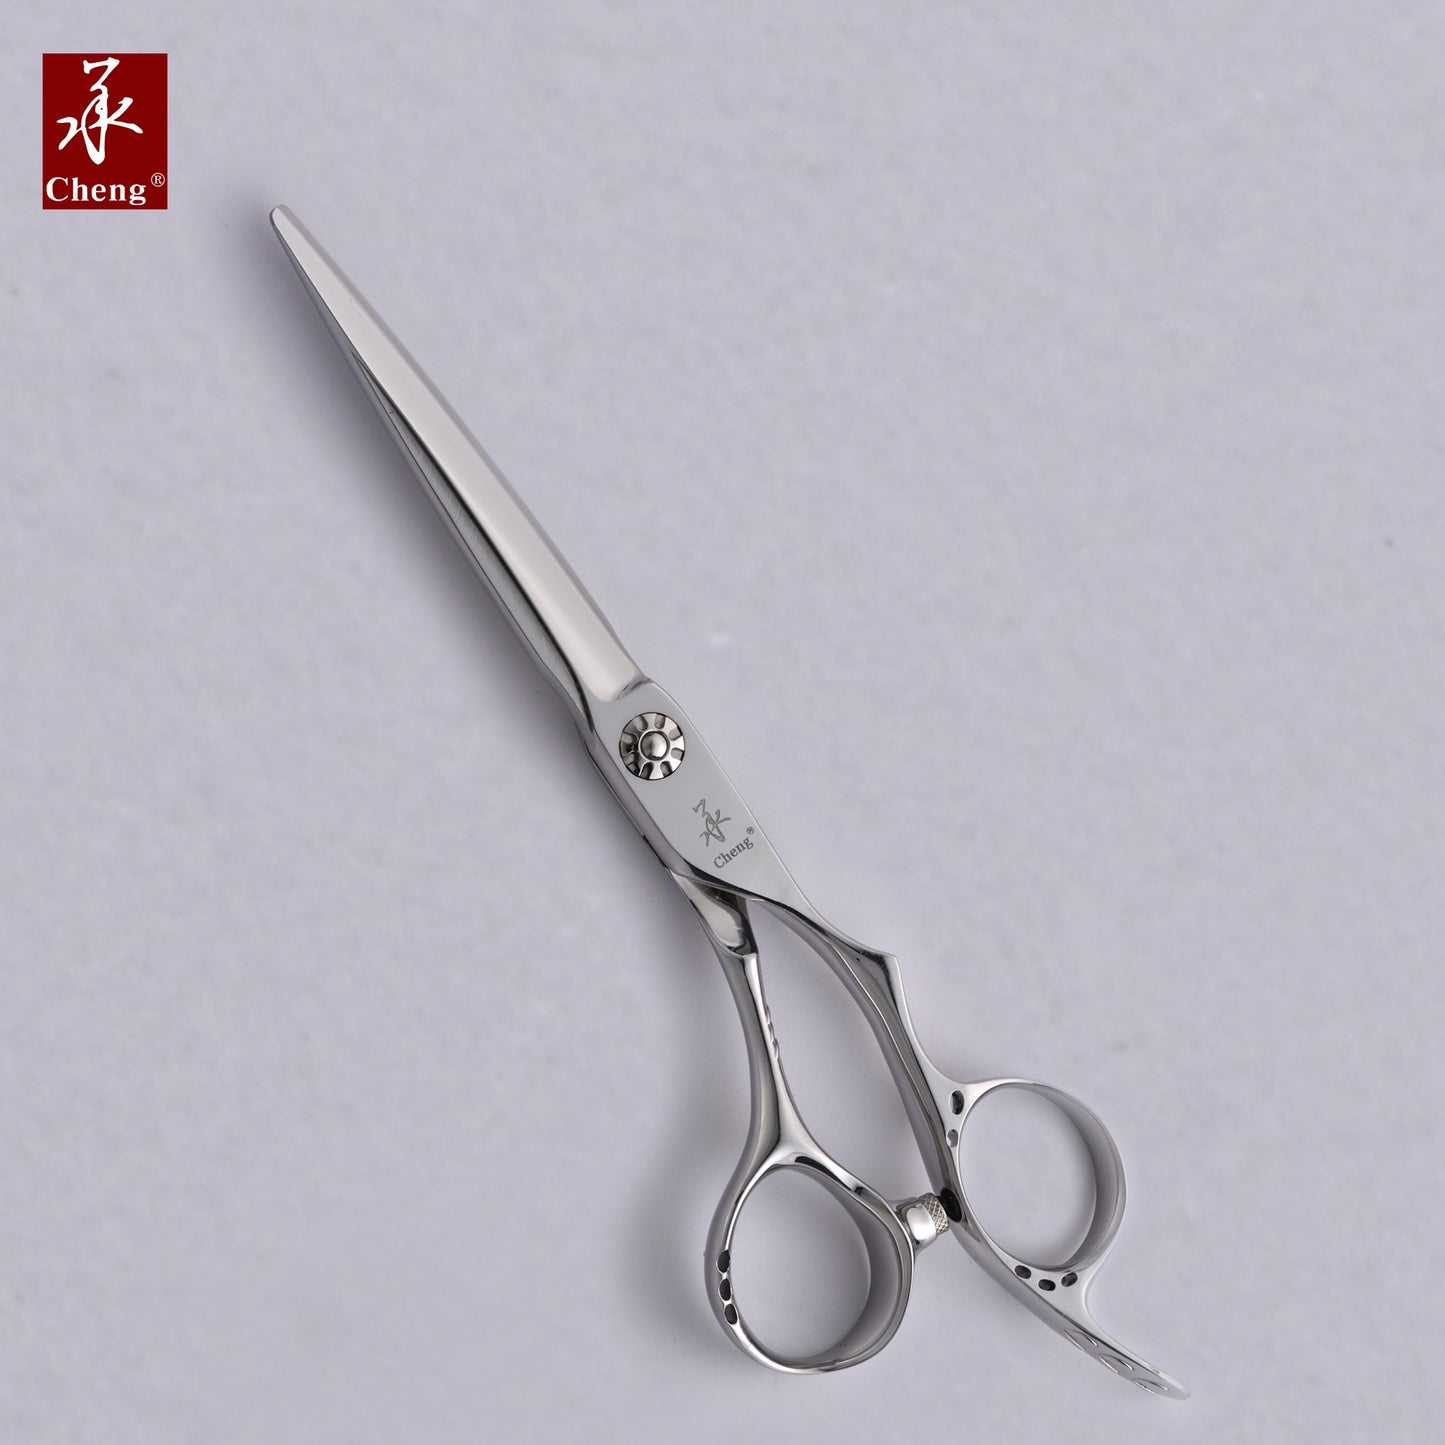 CA4-625N High Luxury Hair Cutting Scissors for Hairdressers and Barbers 6.25 Inch